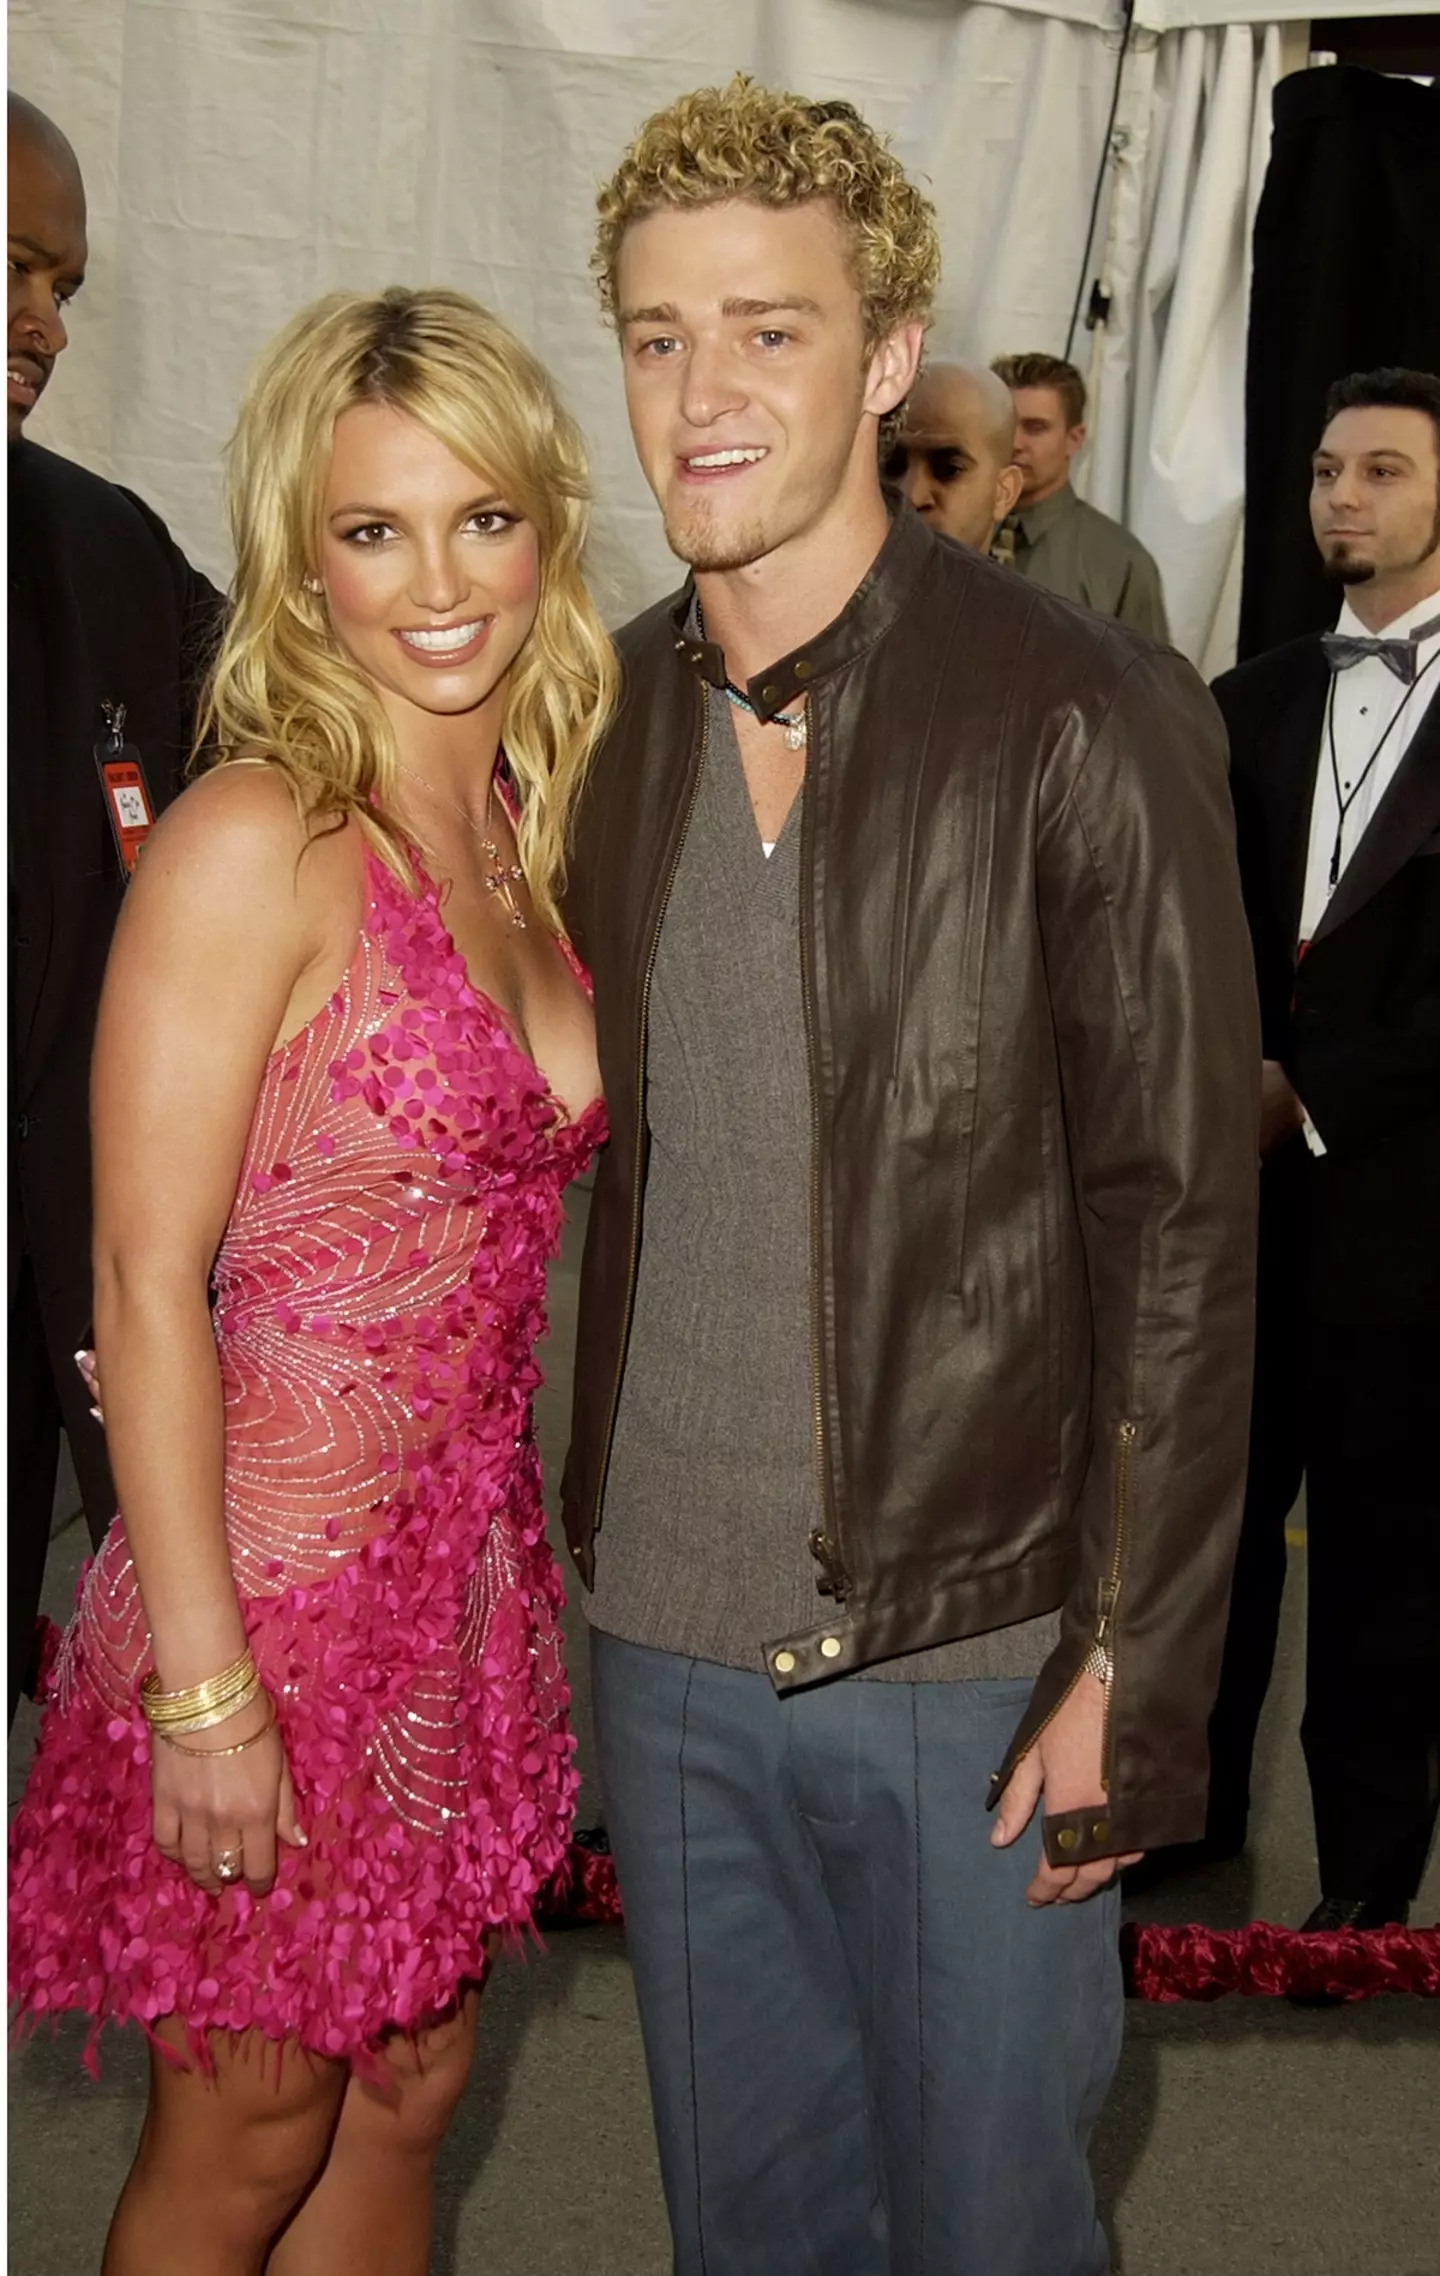 Britney opened up on her turbulent relationship with Justin Timberlake in the memoir.